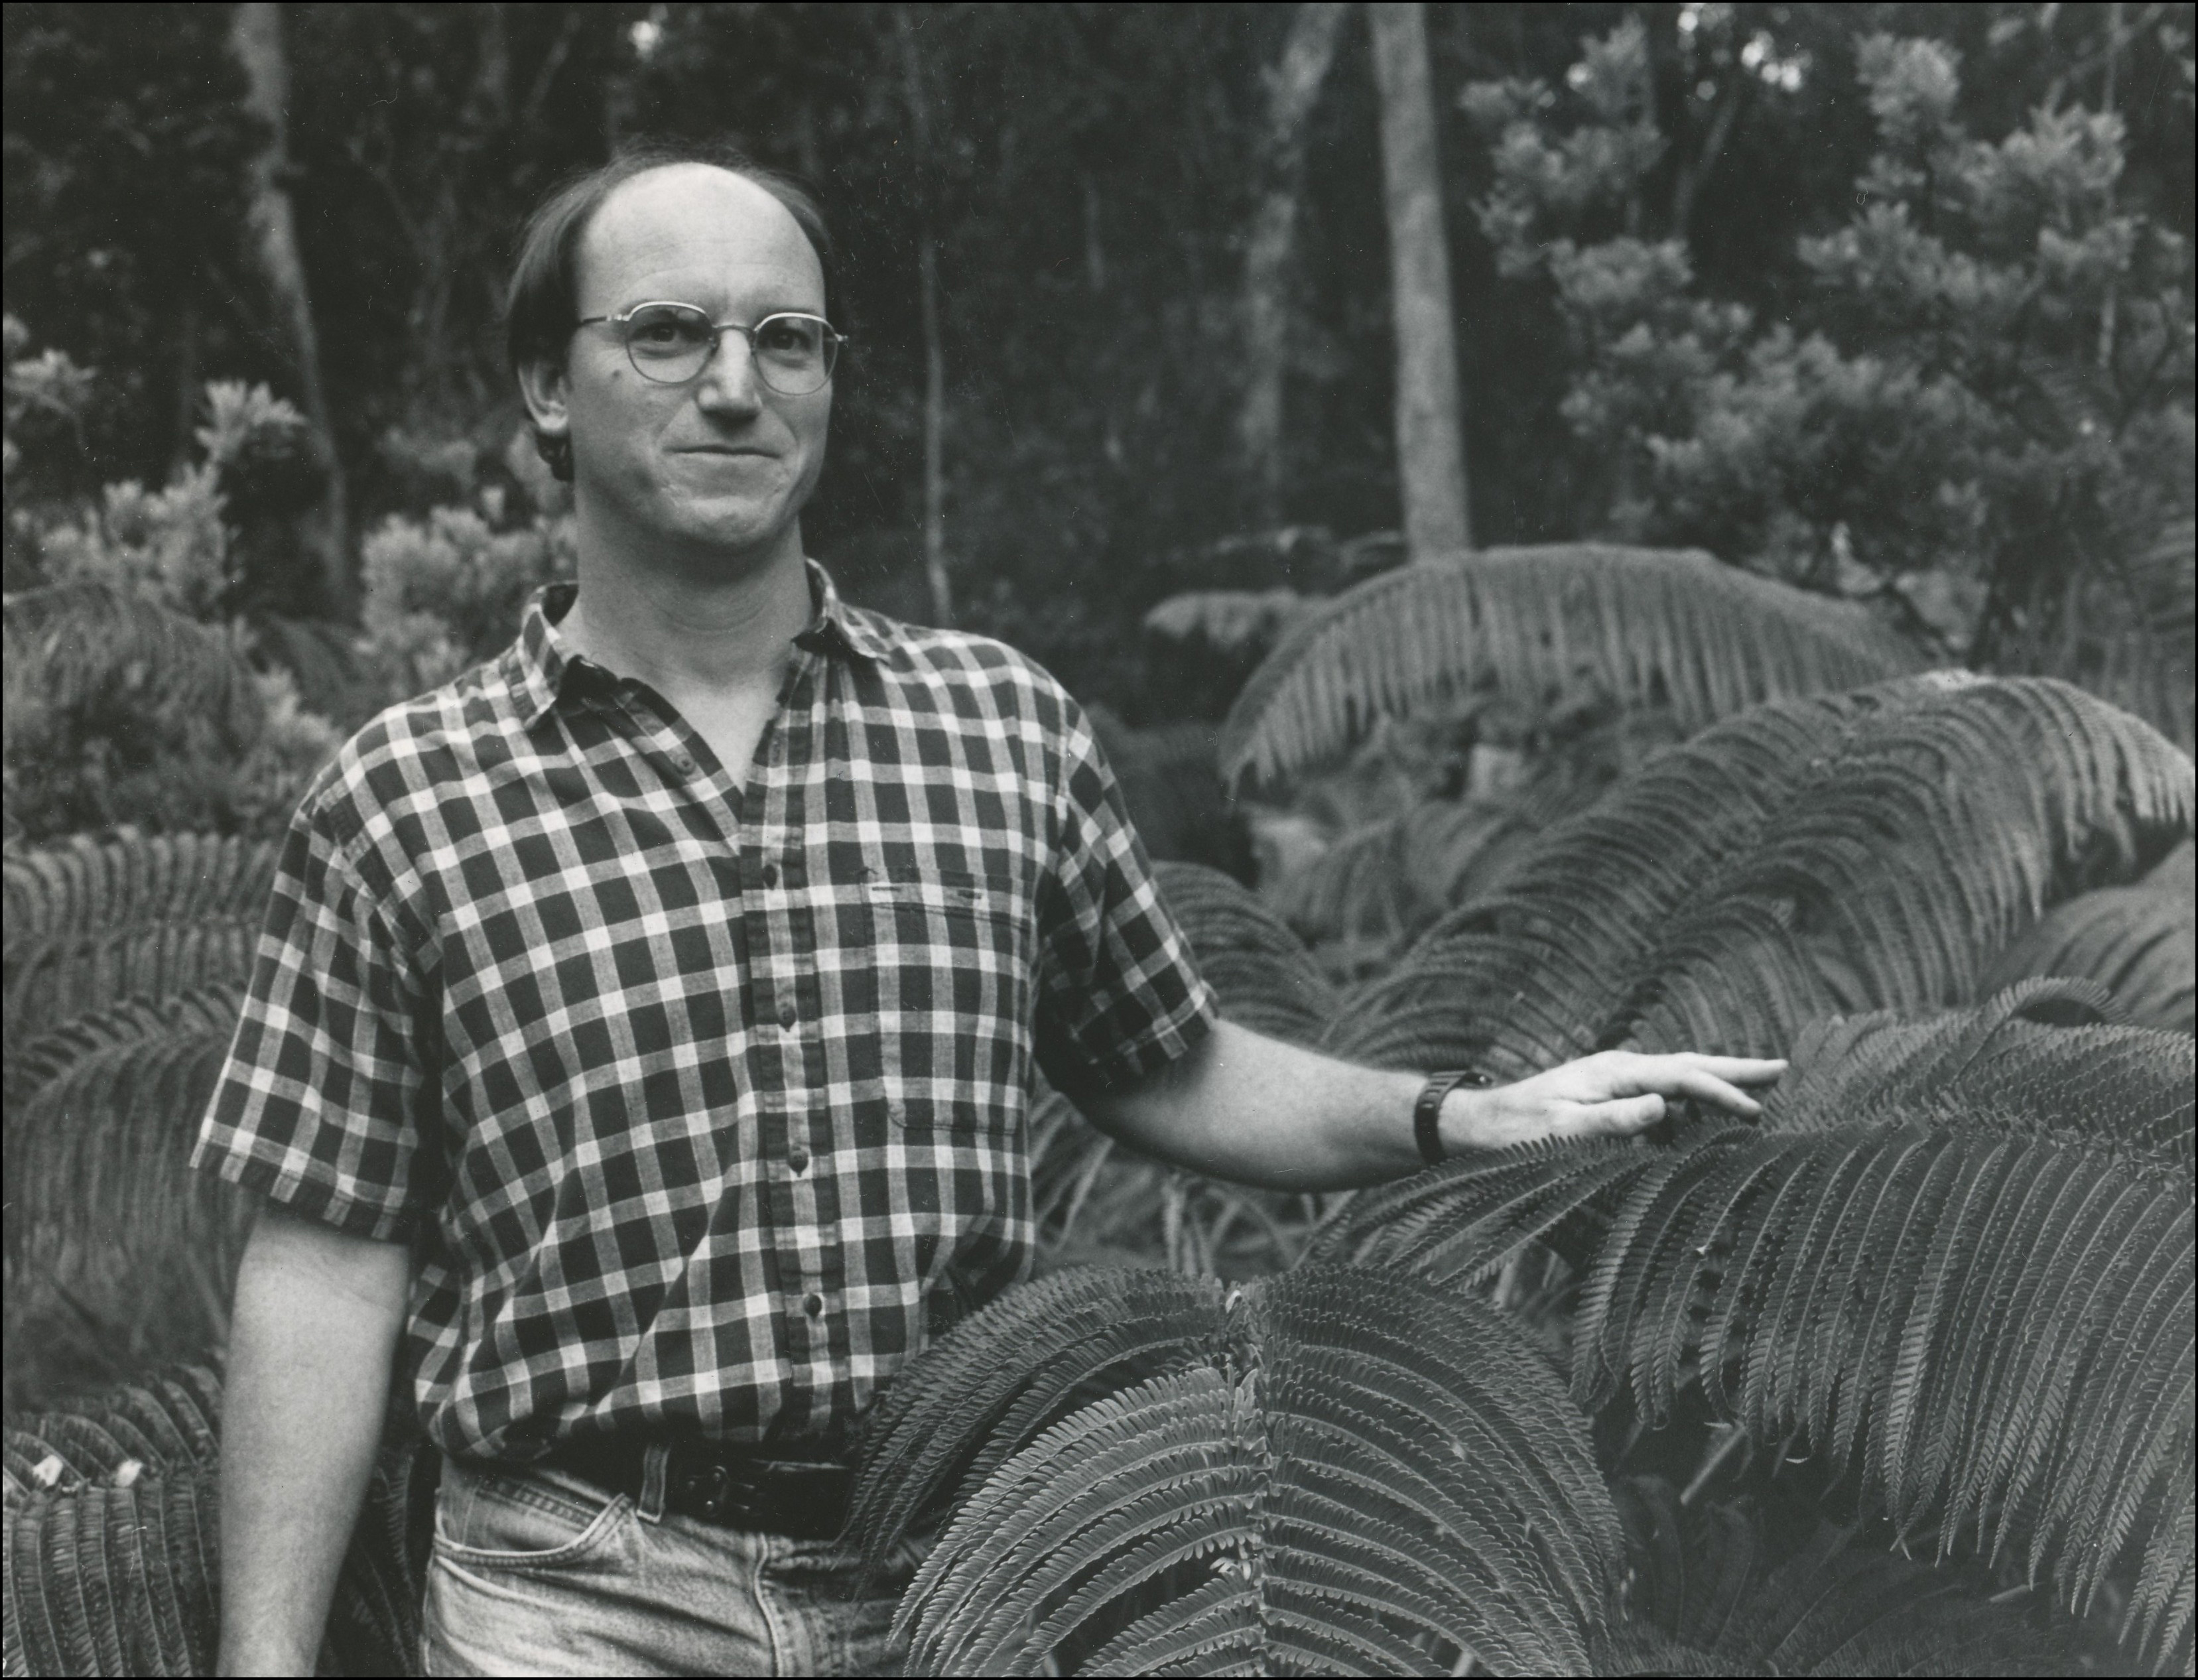 Man with glasses in short sleeved button up plaid shirt standing close to large fern with his left hand touching large fern leaf